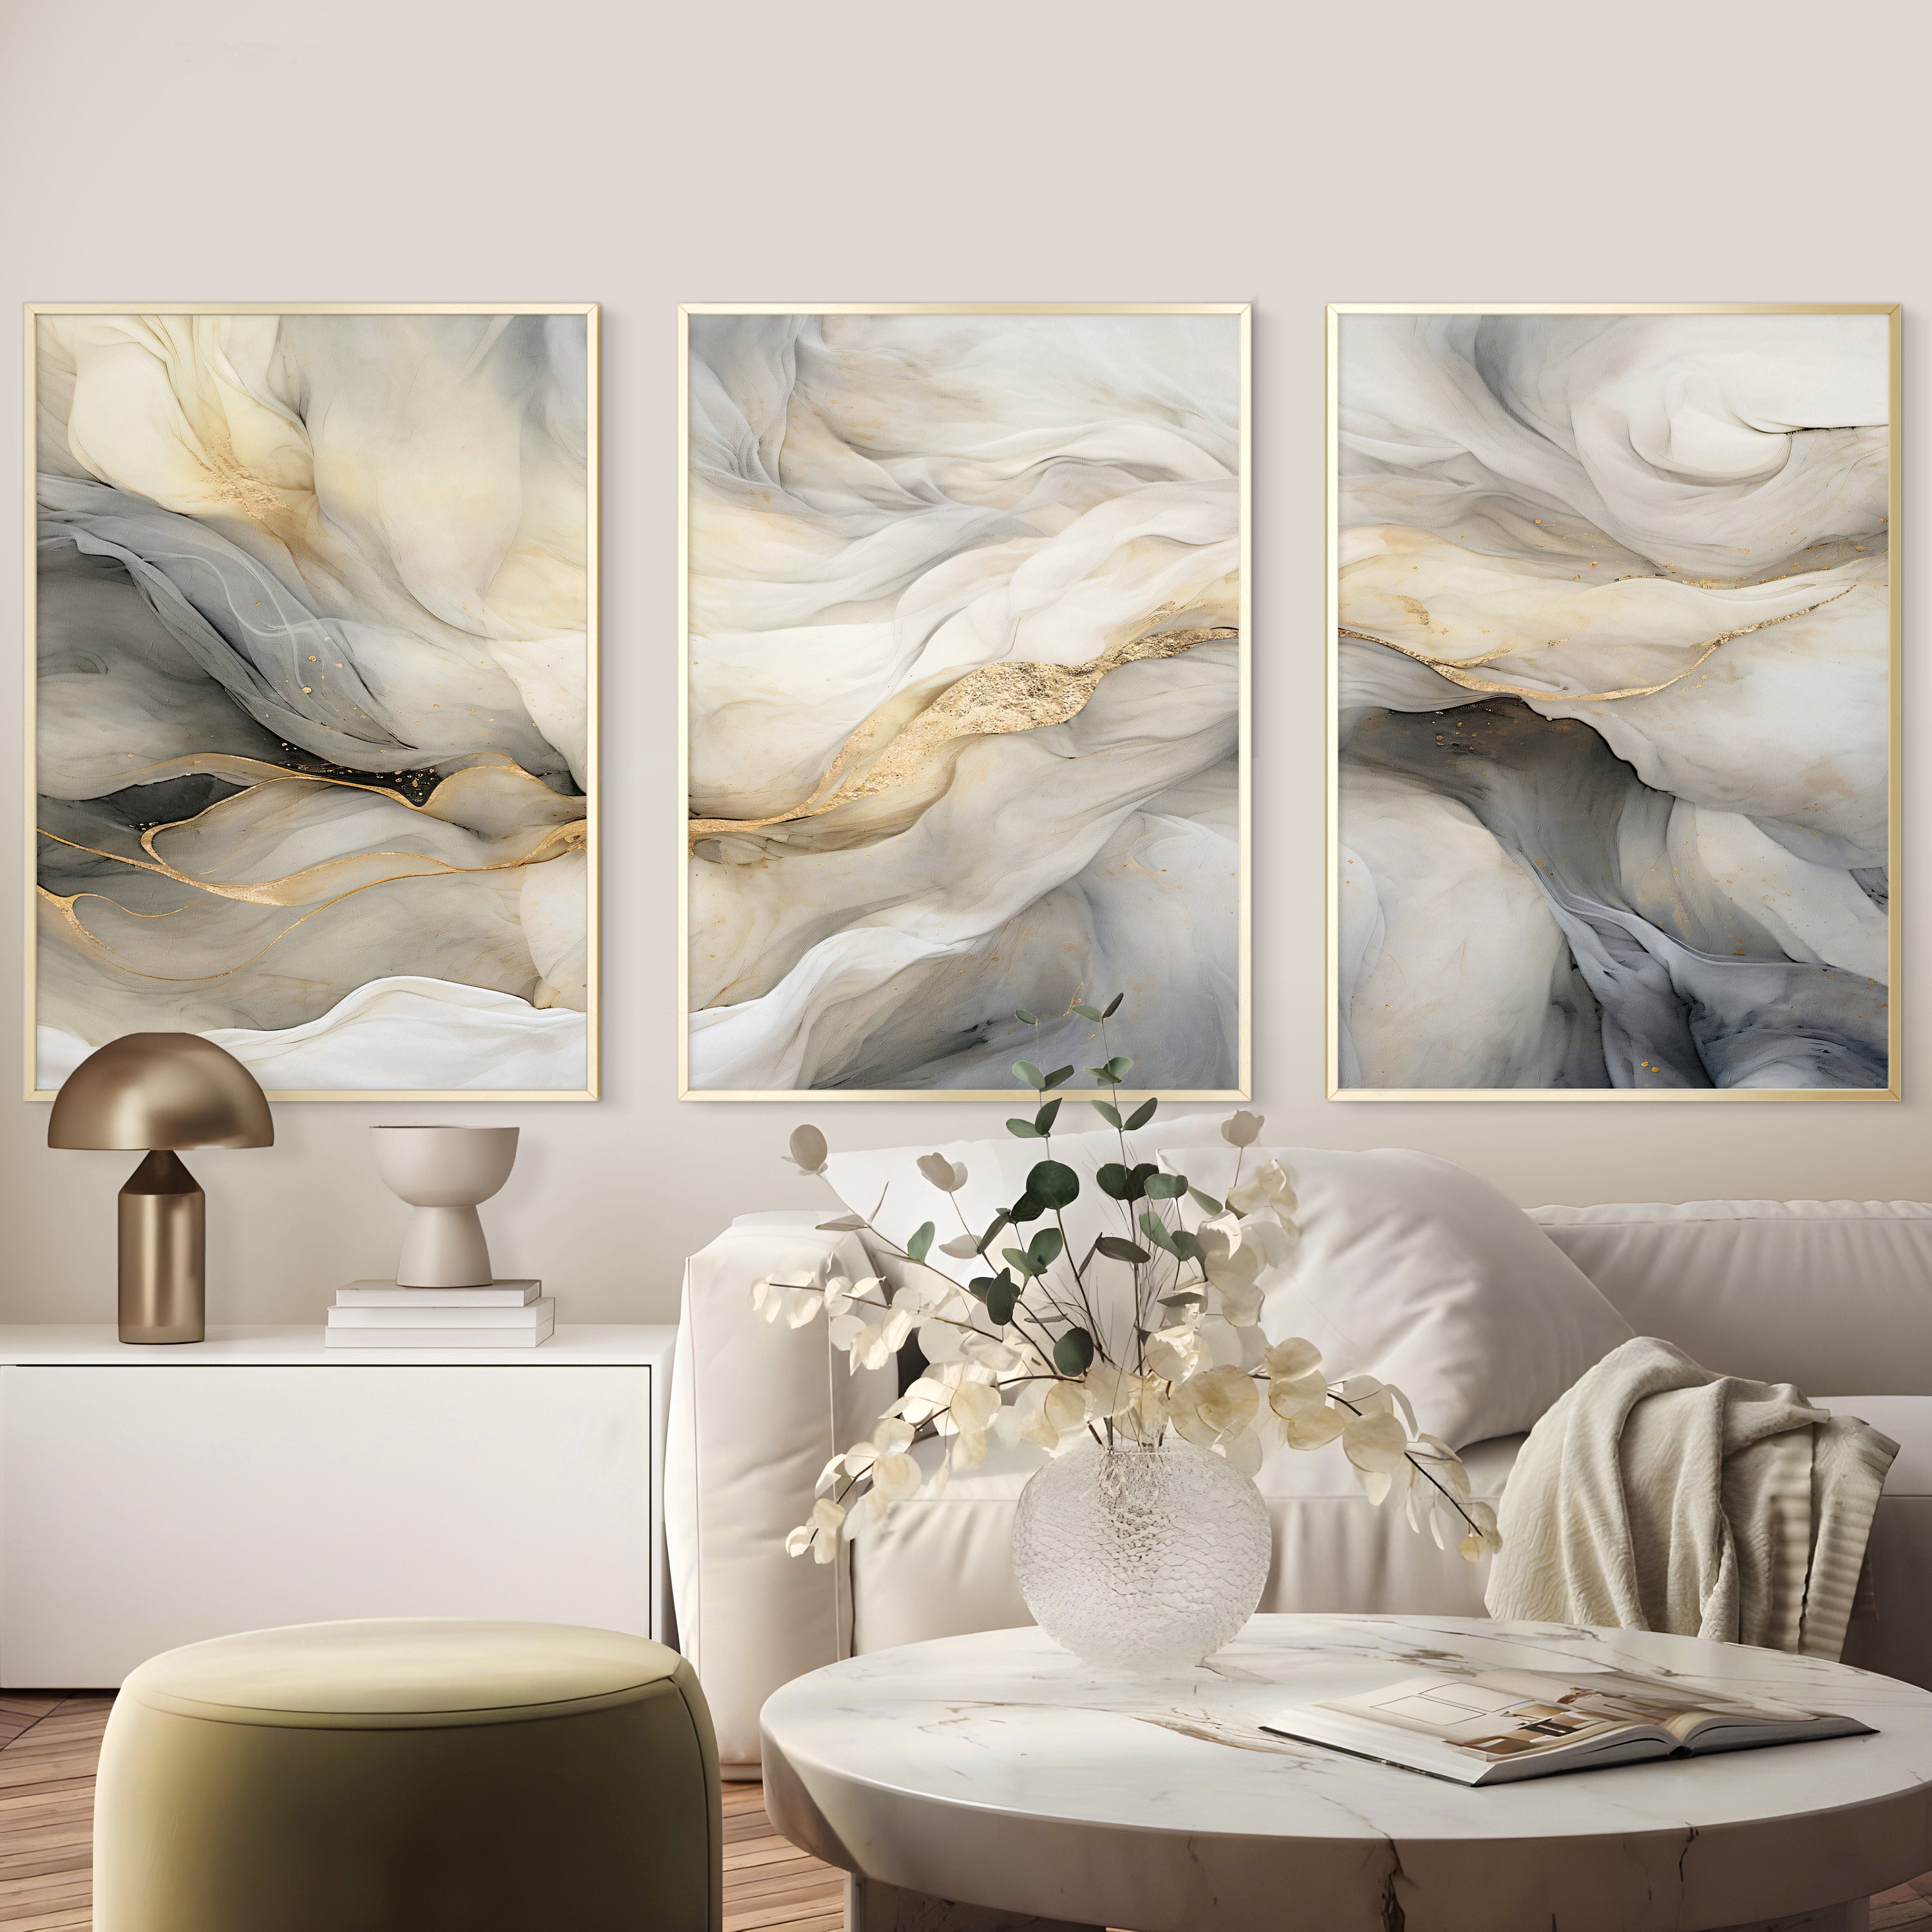  DuoBaorom 3 Pieces Old Film Canvas Wall Art Abstract